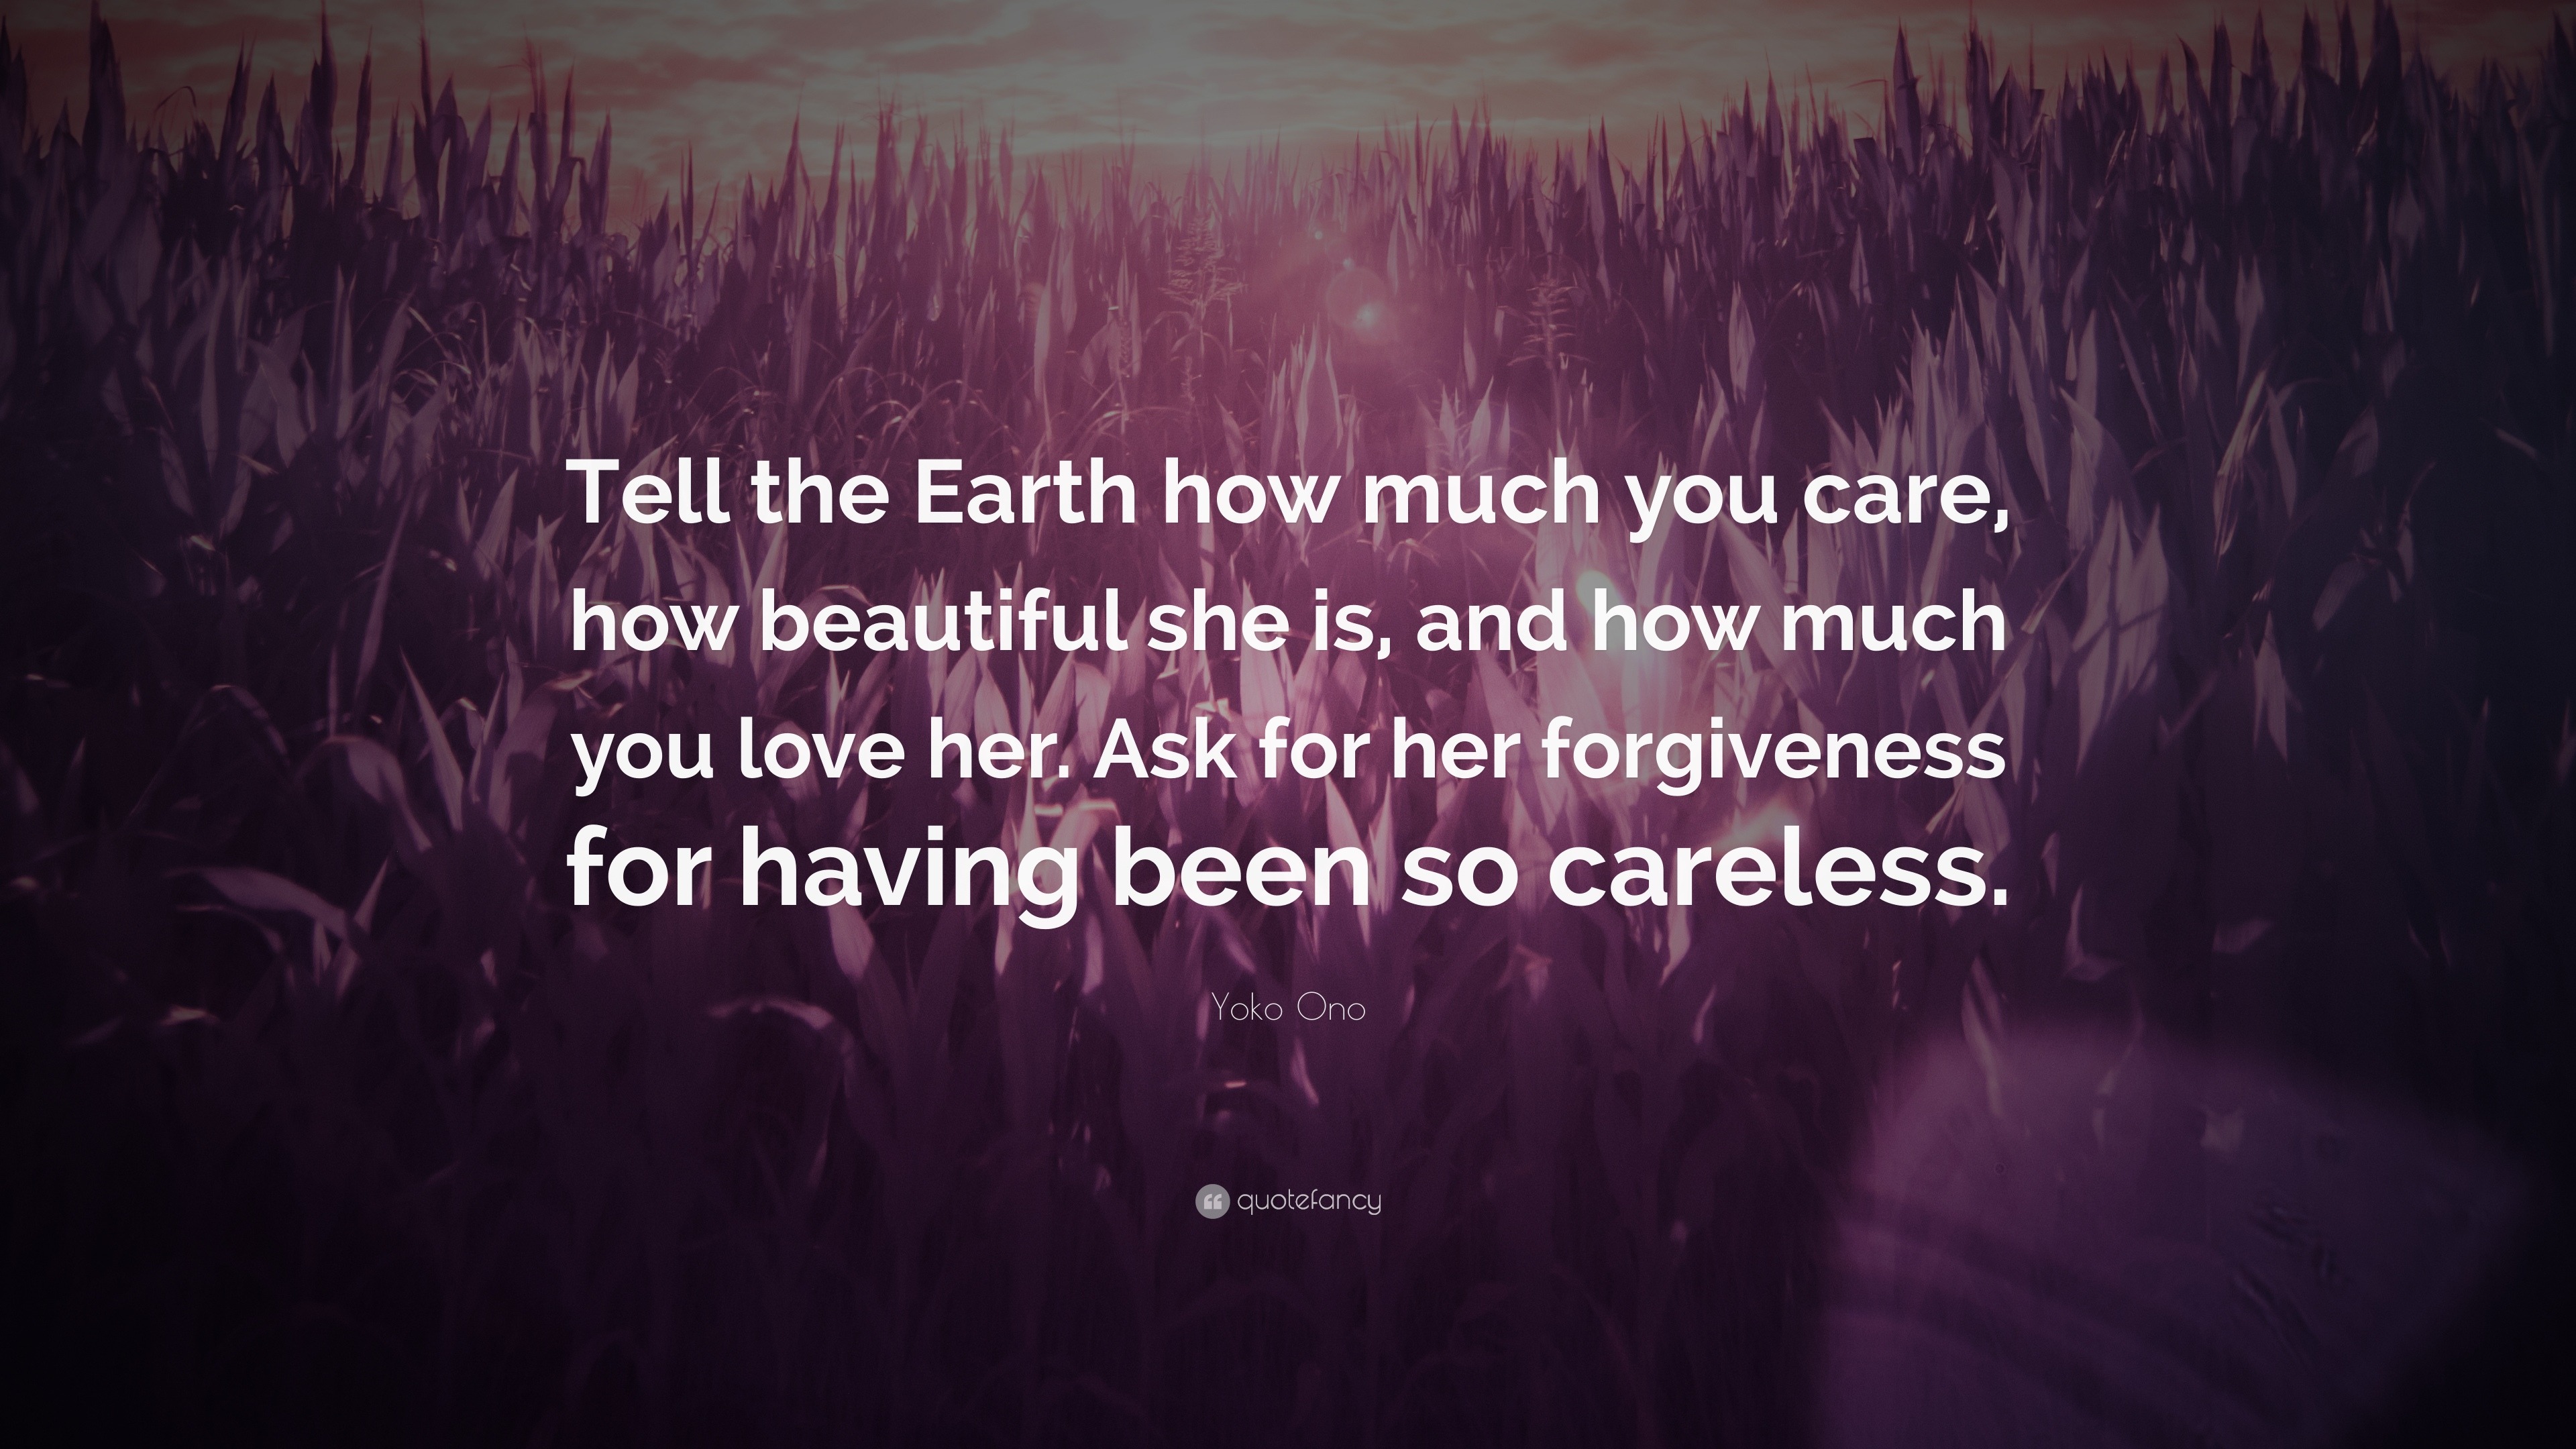 Yoko o Quote “Tell the Earth how much you care how beautiful she